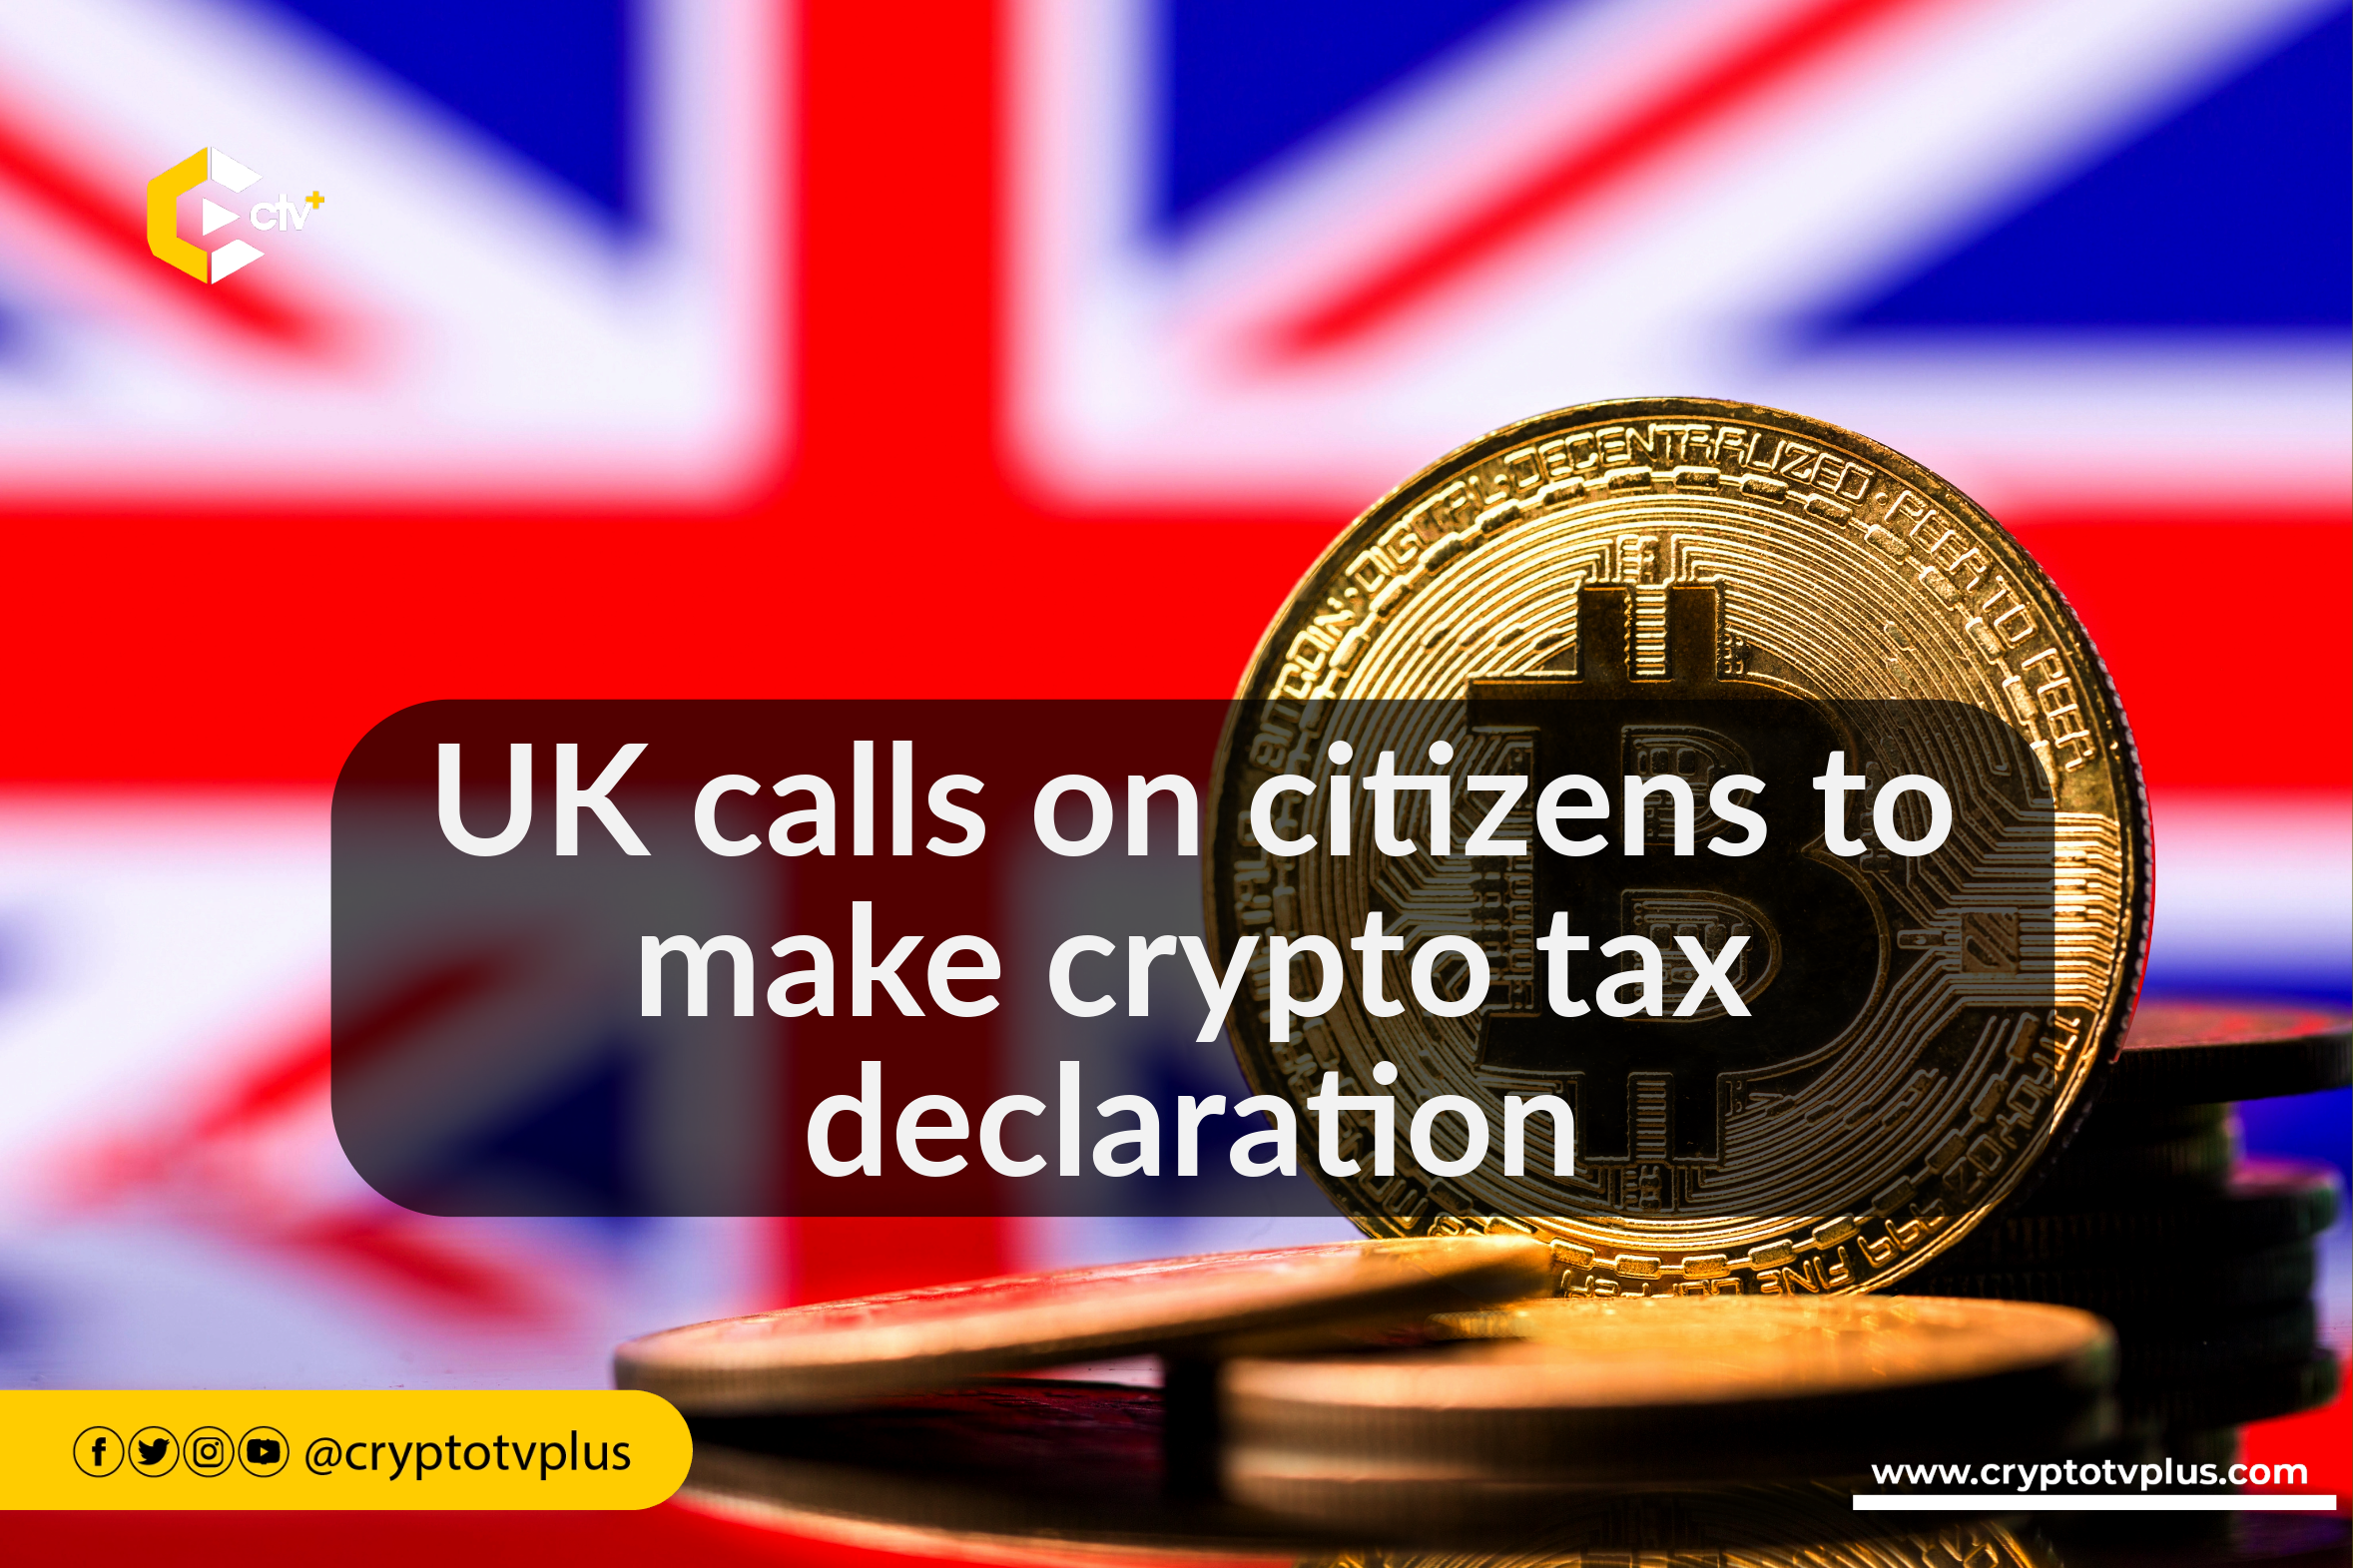 The UK government urges voluntary disclosures for unpaid taxes on crypto assets. HMRC enforces tax compliance and provides tax-related services. unpaid taxes, crypto assets, HM Revenue & Customs, voluntary disclosures